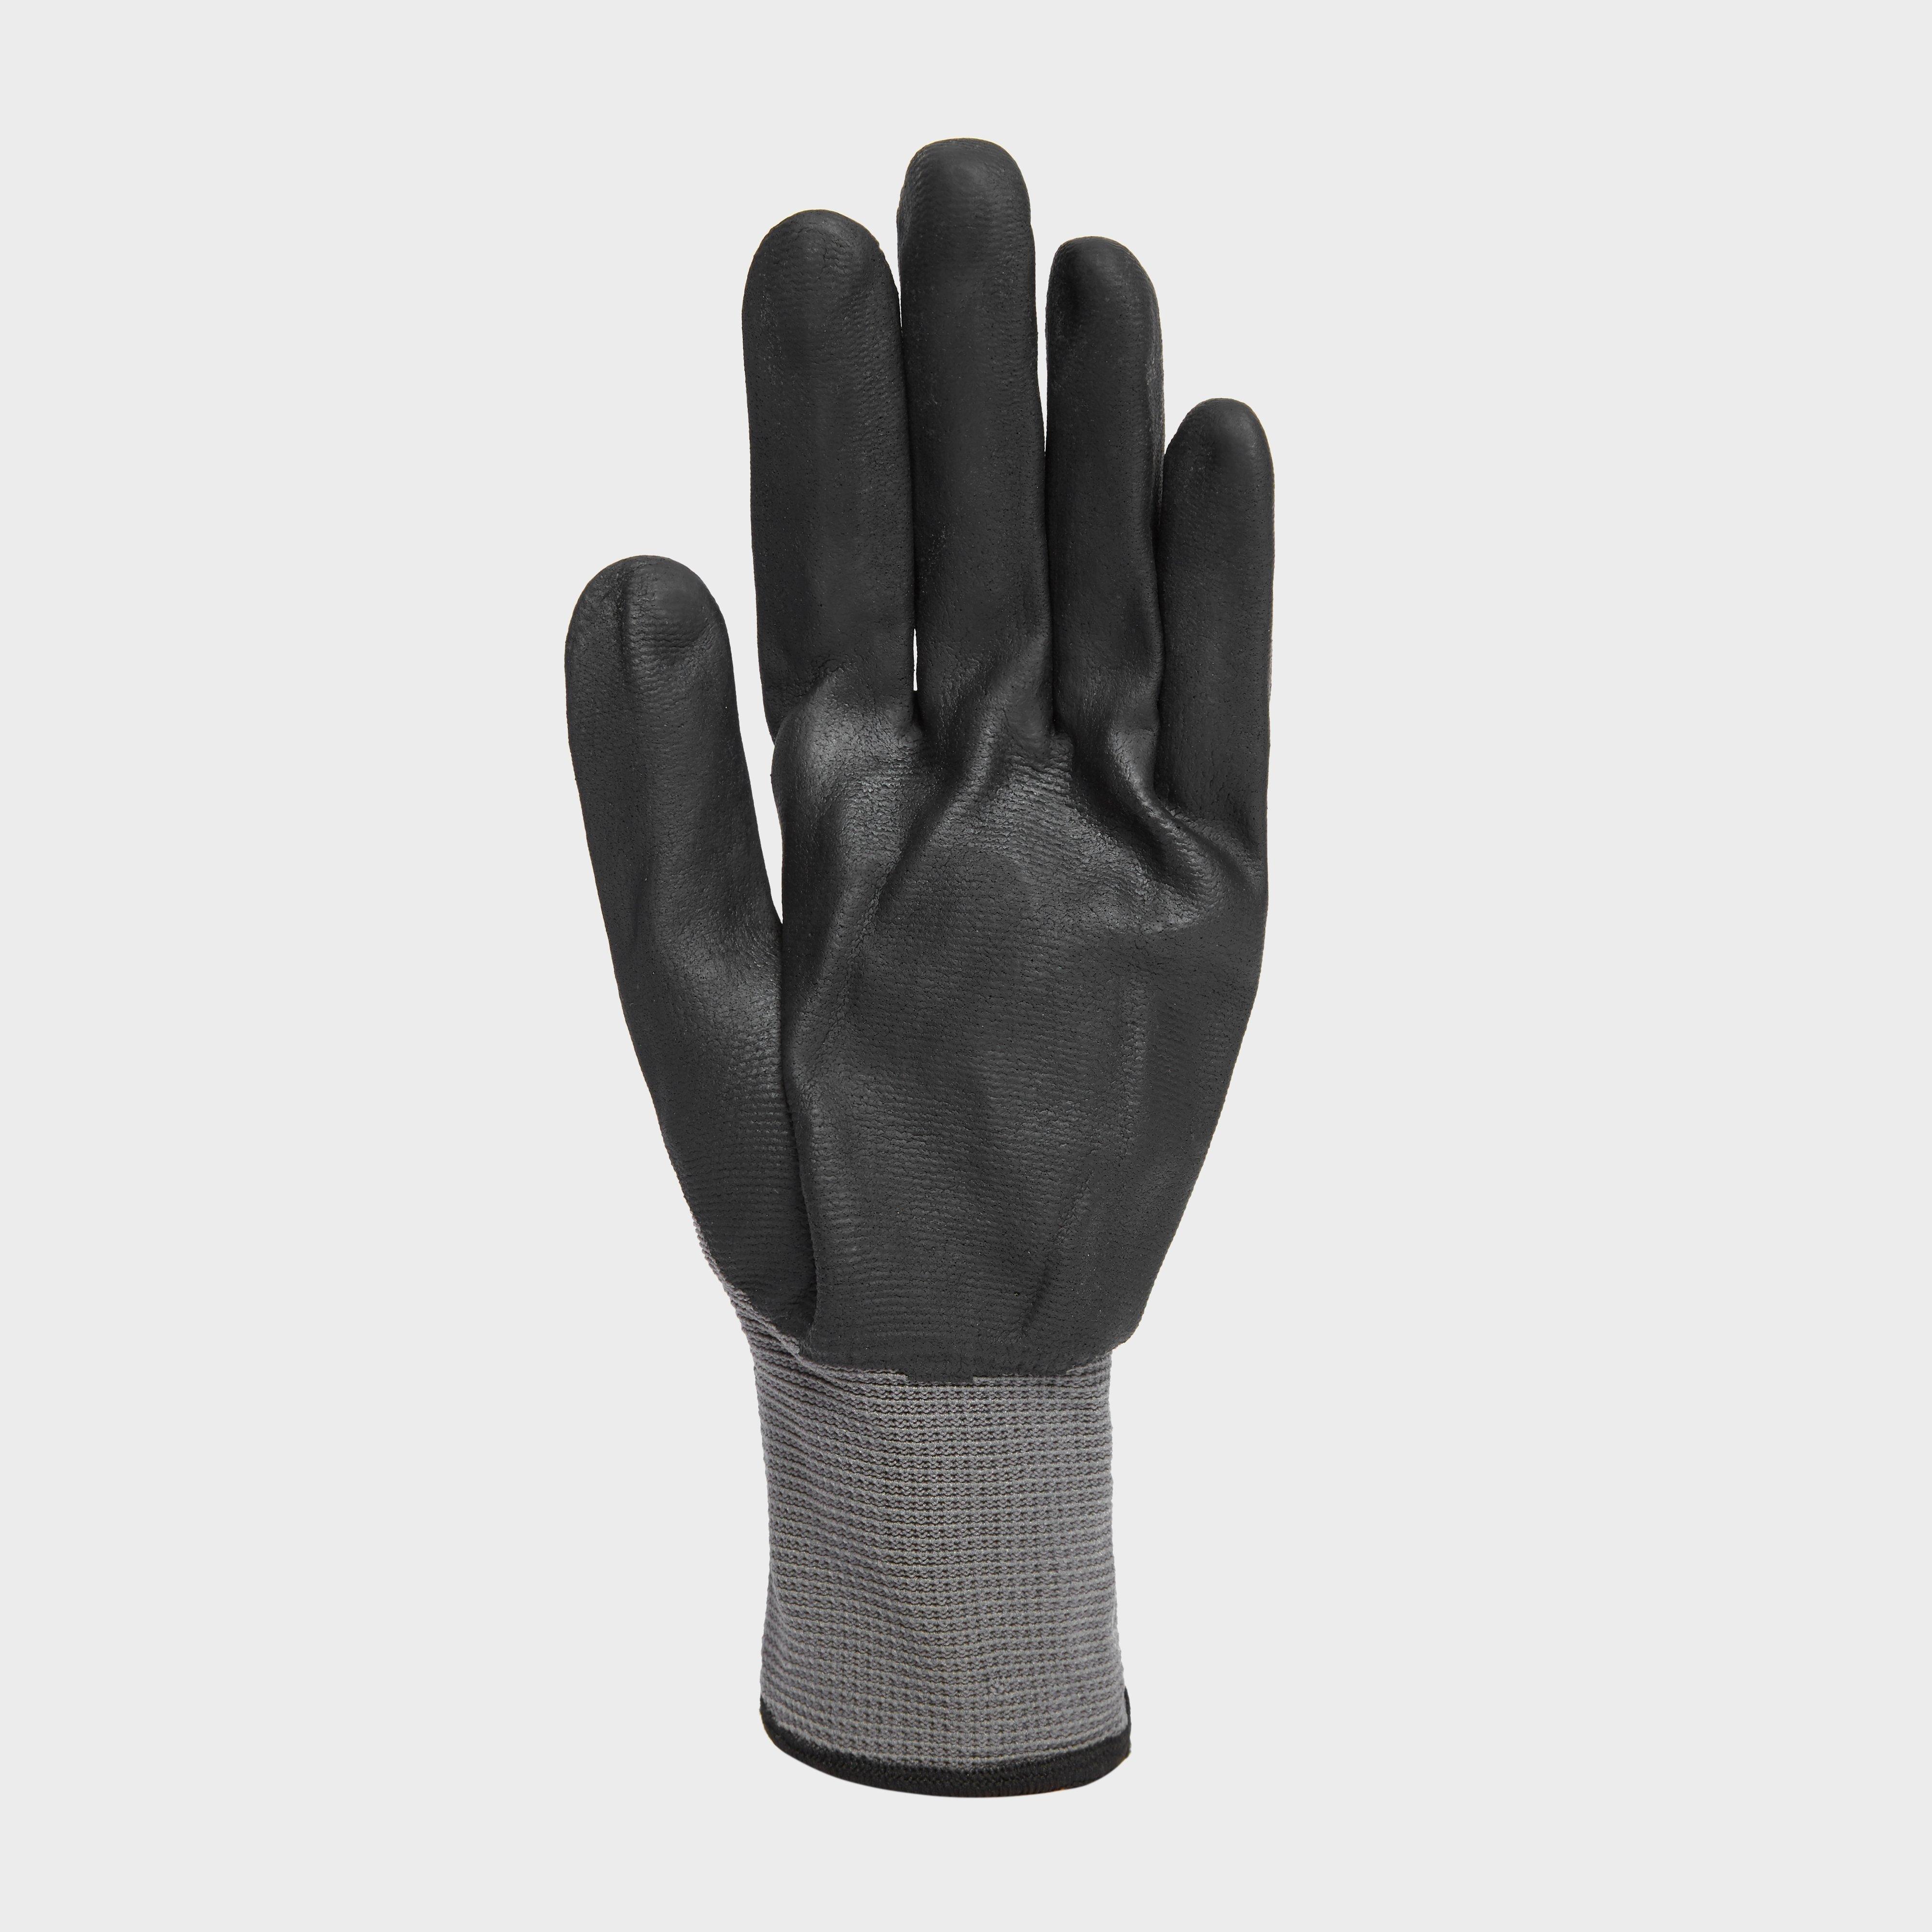 Aubrion All-Purpose Yard Gloves Review